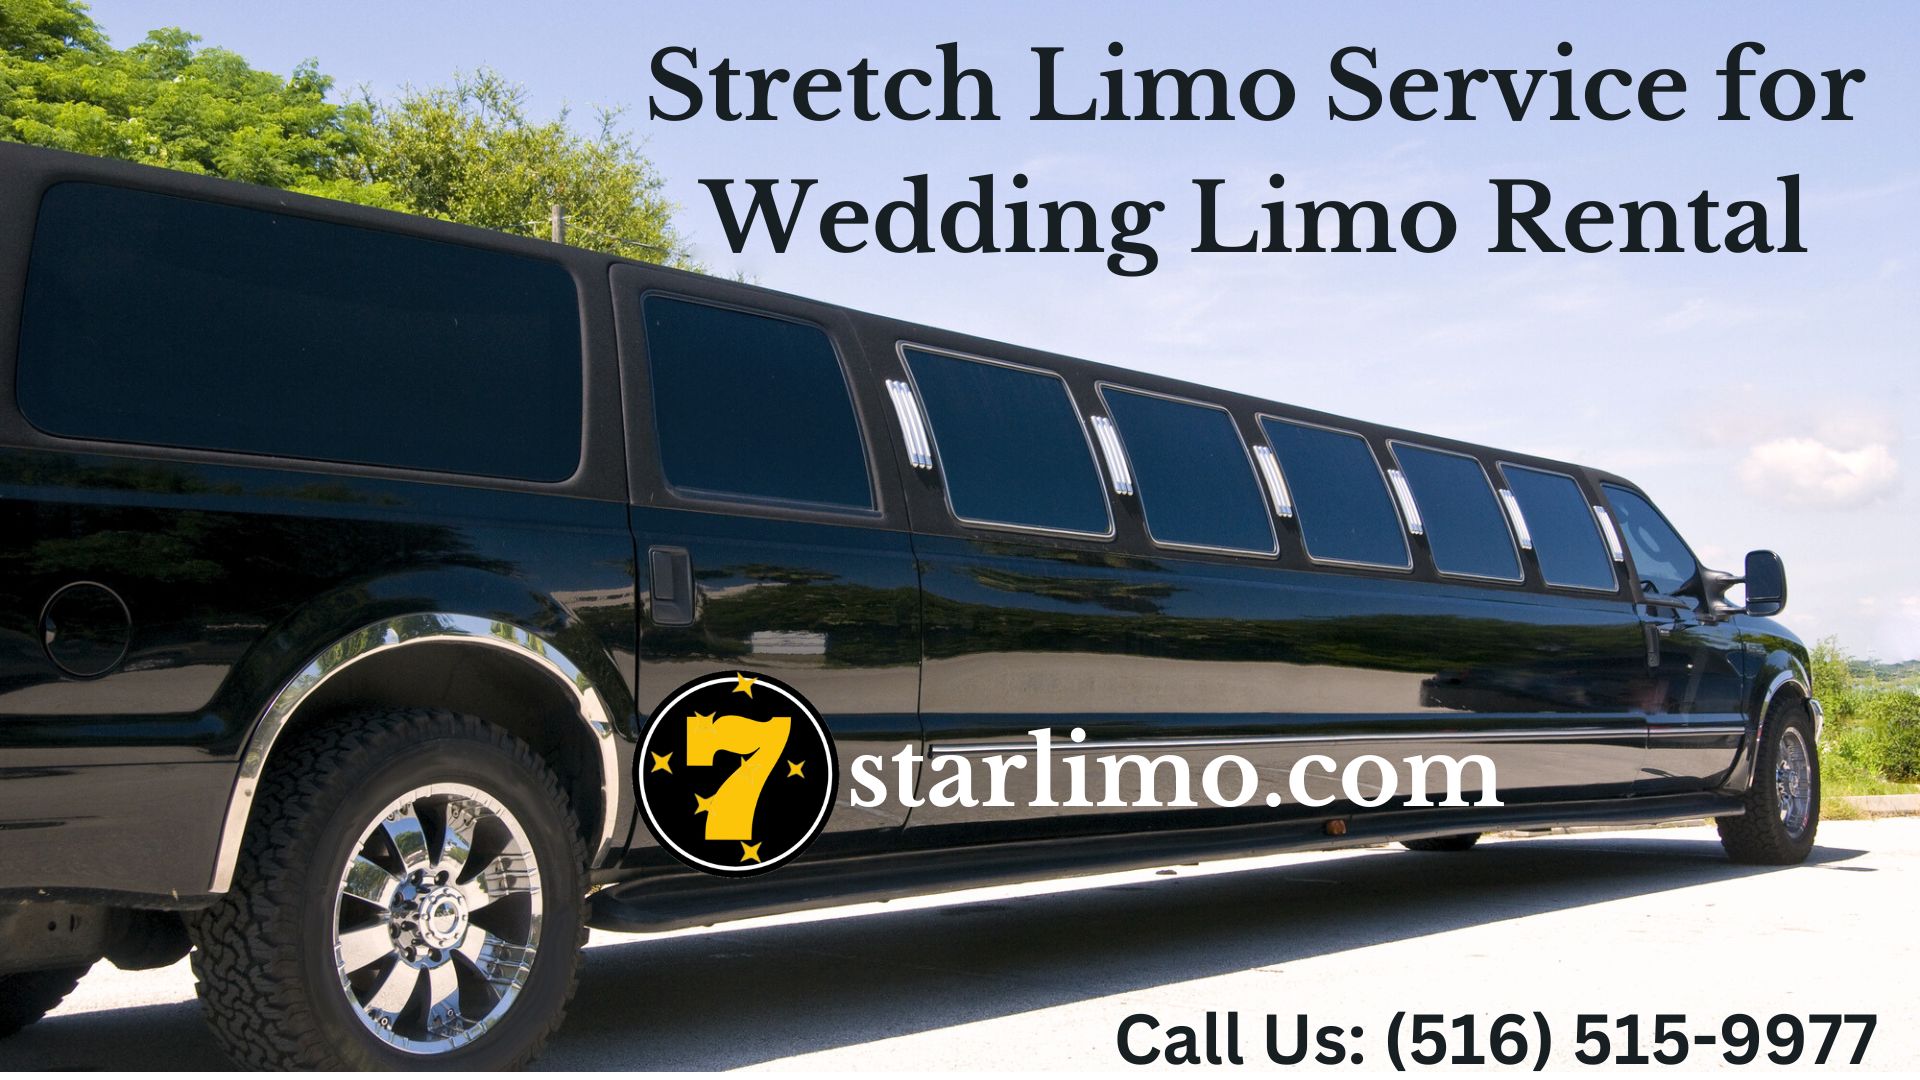 Stretch Limo Service for Wedding Limo Rental